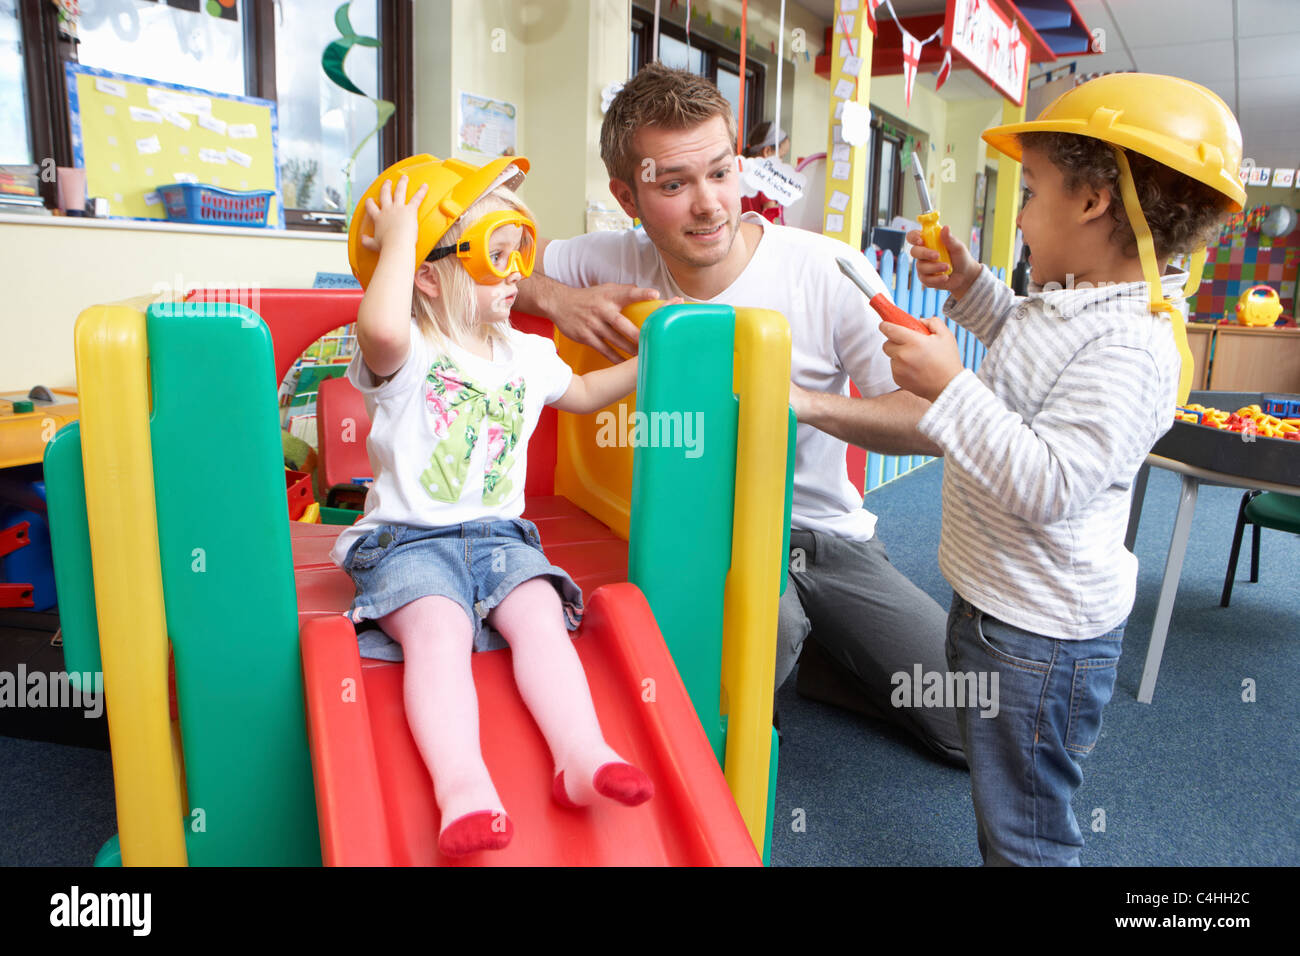 Man with children playing together Stock Photo